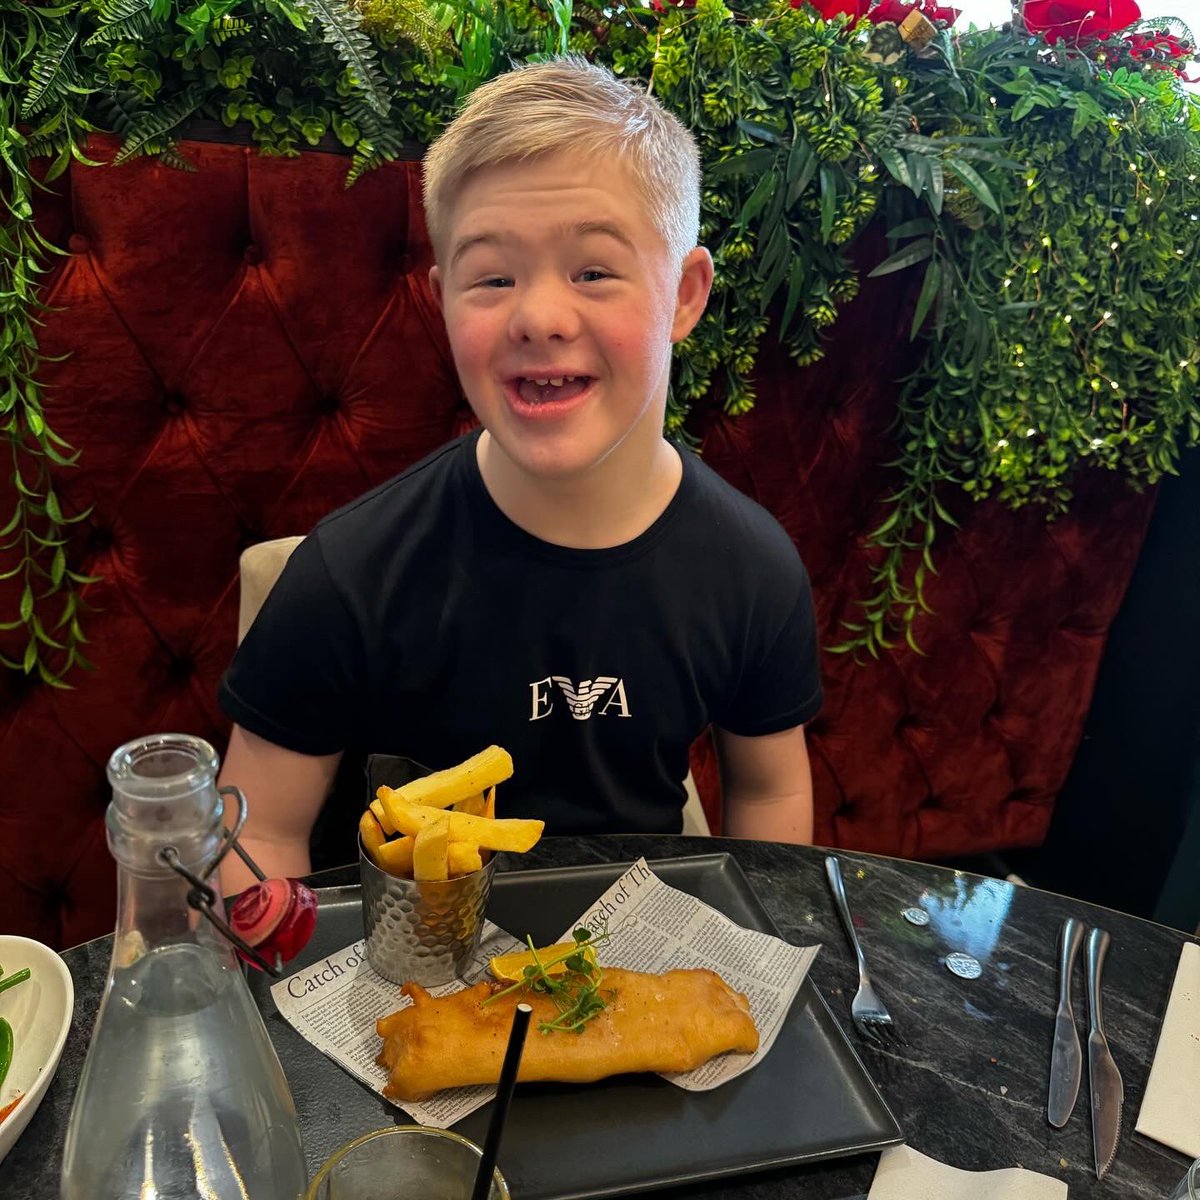 Harvey on instagram! we appreciate the support& encouragement4many years now on X &would 💙u2 continue 2share his journey on Emmerdale; growing up with DownsSyndrome,hisinterests,activities,challenges&achievements His username is helloharvey2024. X instagram.com/helloharvey202…